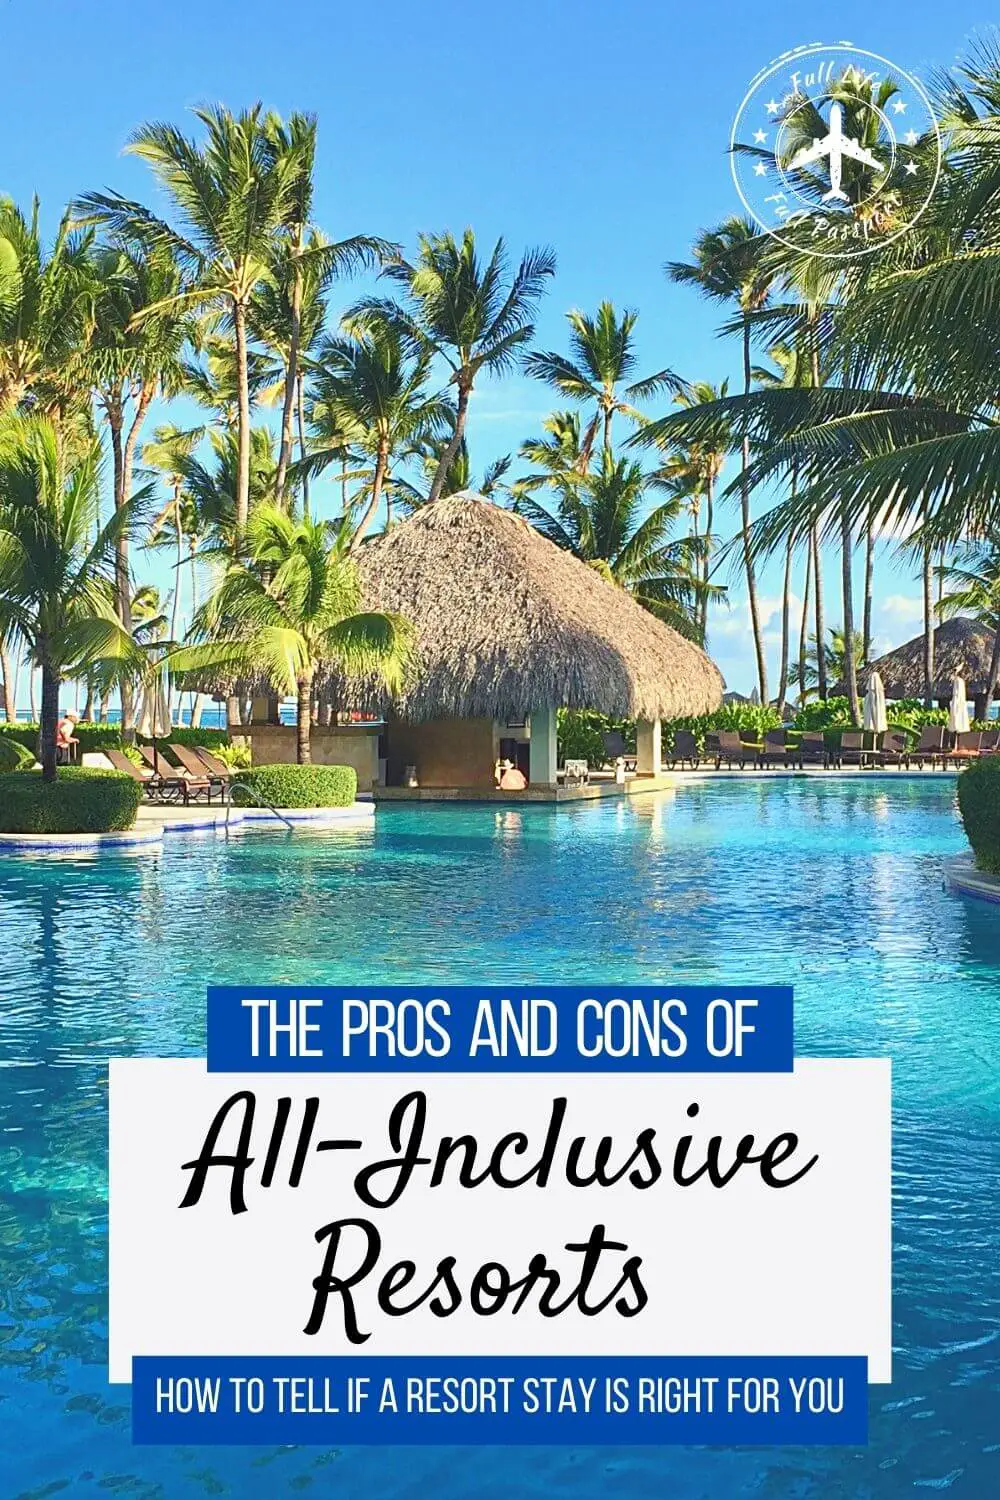 The Pros and Cons of All-Inclusive Resorts